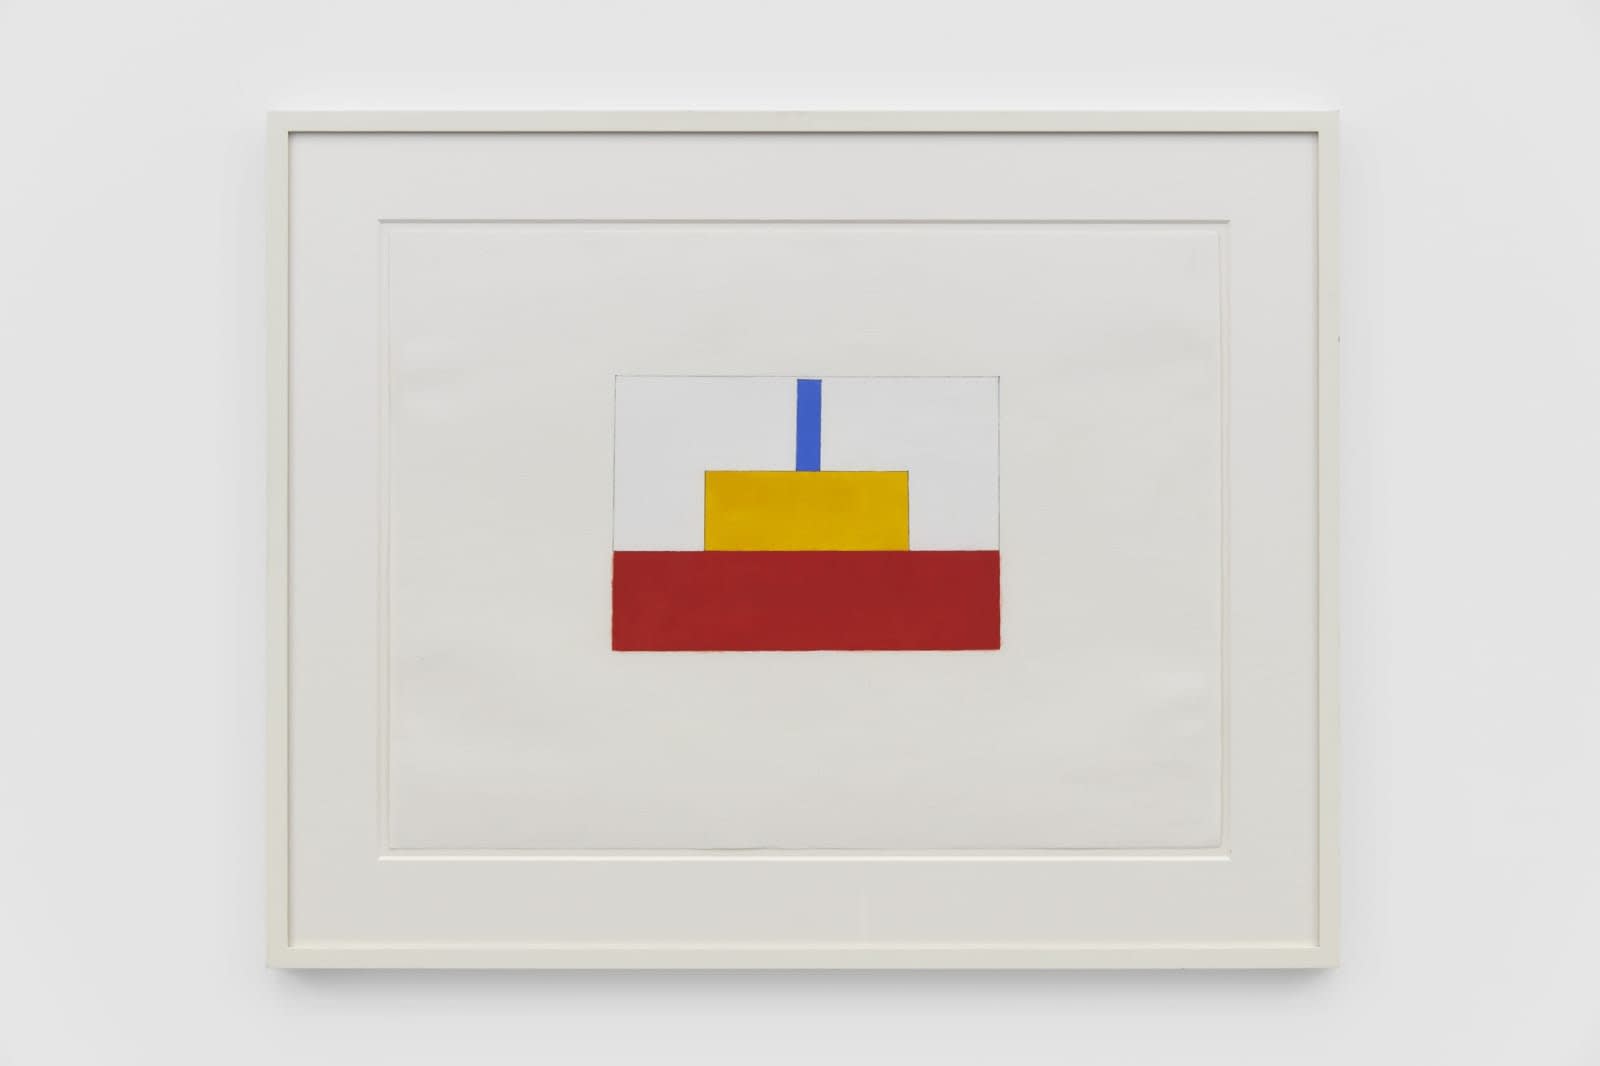 Untitled (Castle BYR), 2002 oil, pencil on paper 56.7 x 76.3 cm. 22 3/8 x 30 1/8 in.